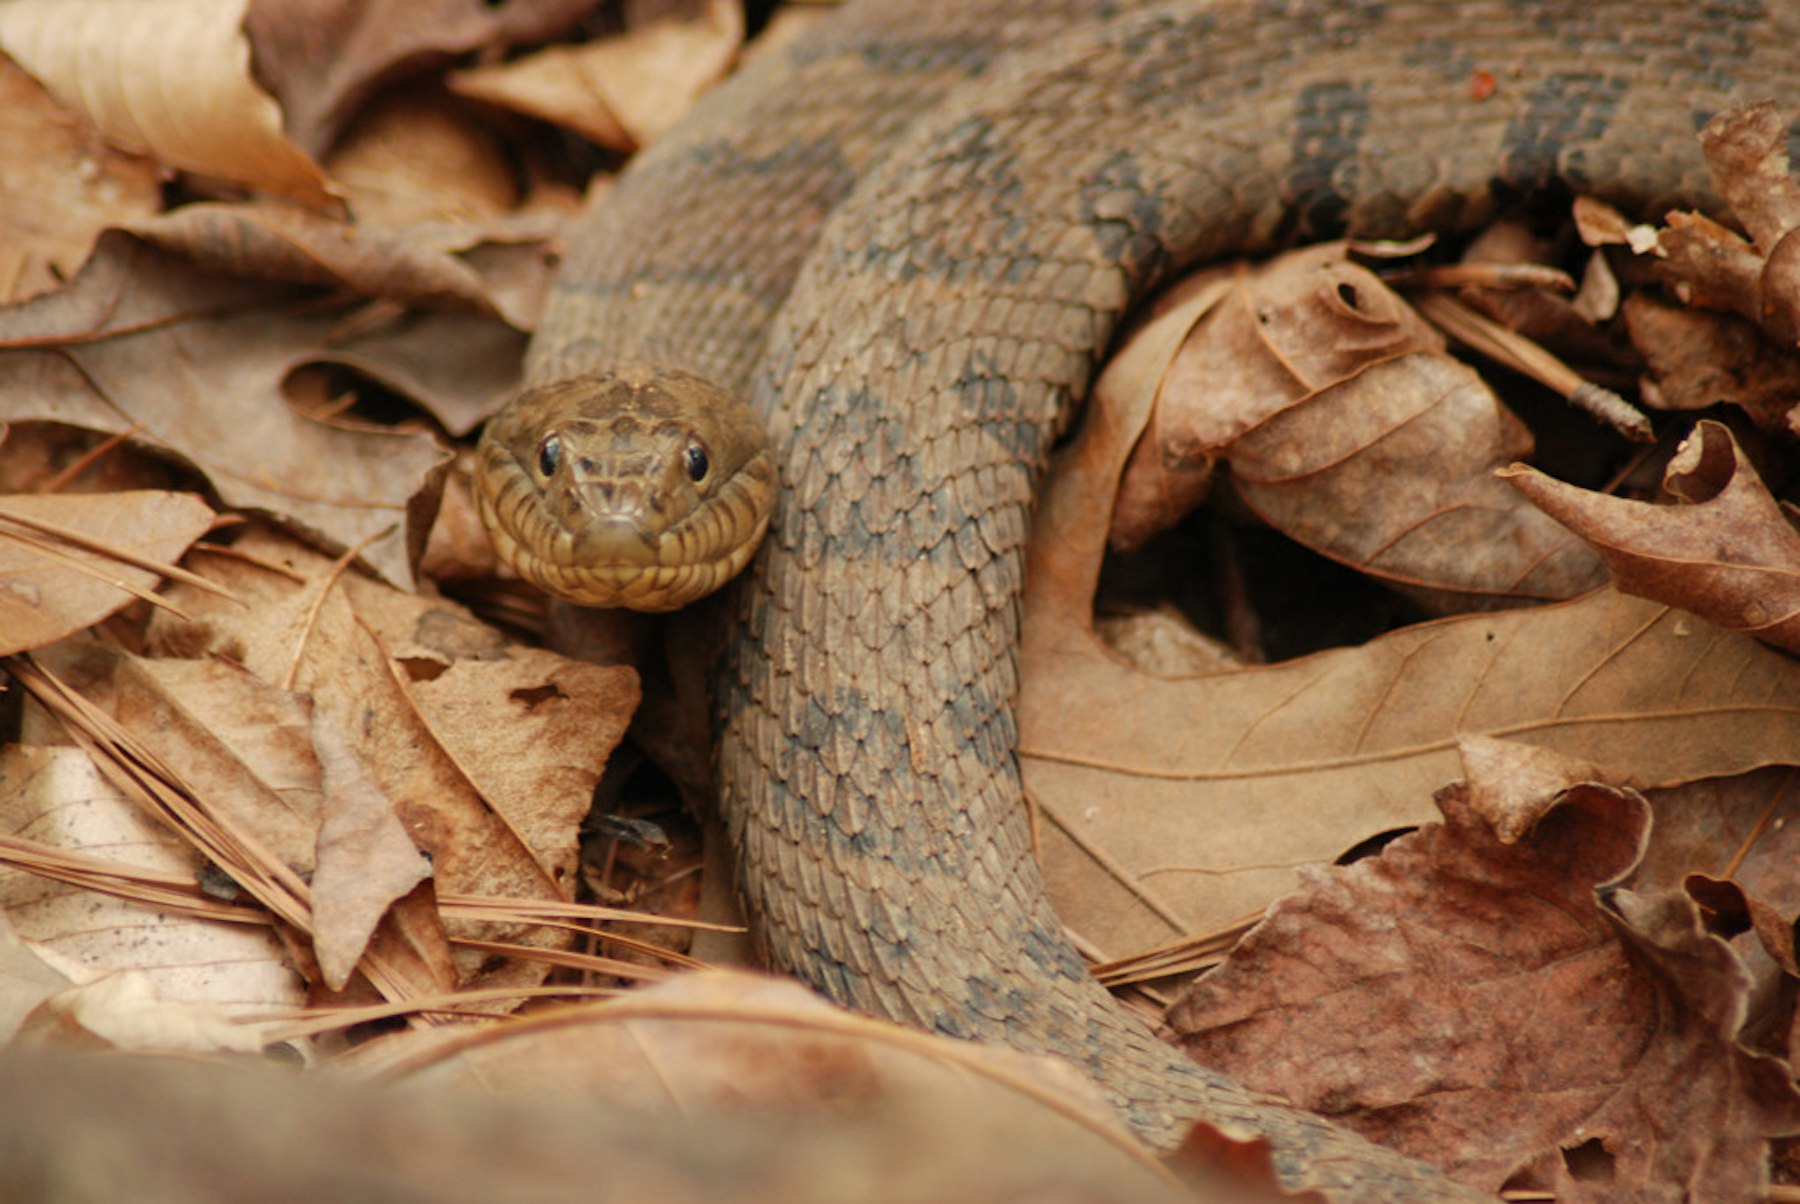 Grass Snake Plays Dead on a Cold Day